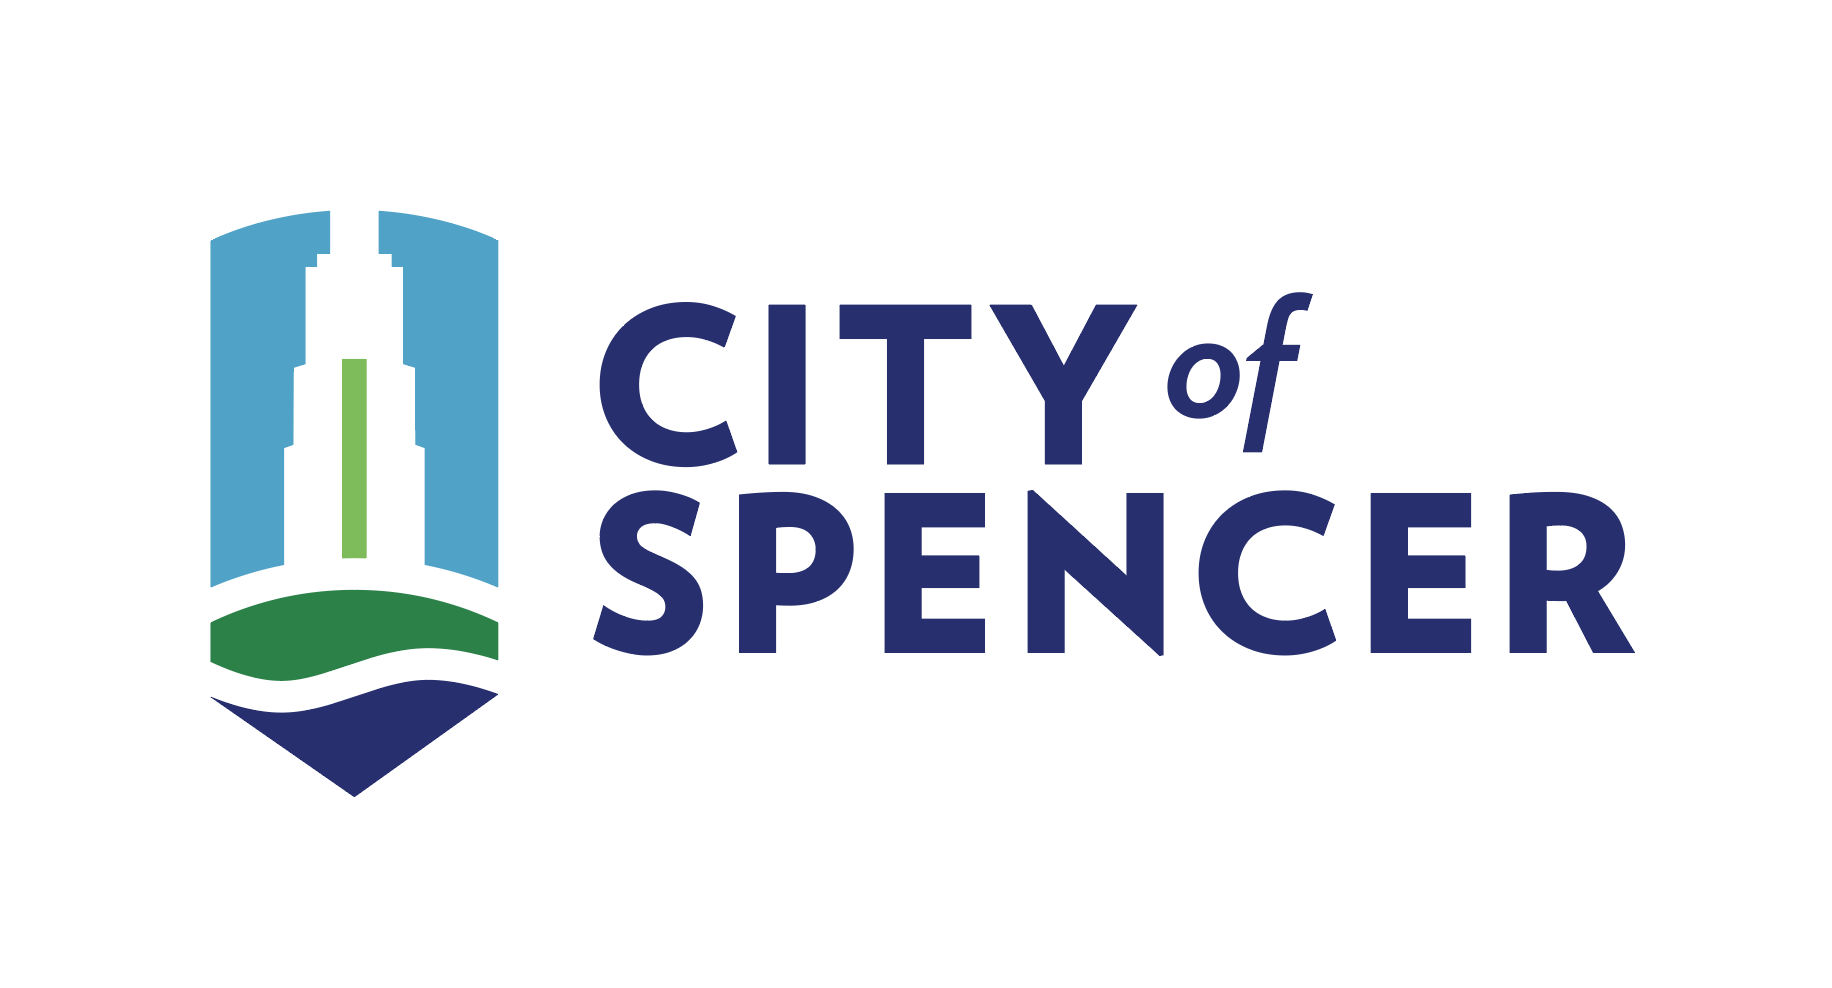 City of Spencer, local government offices